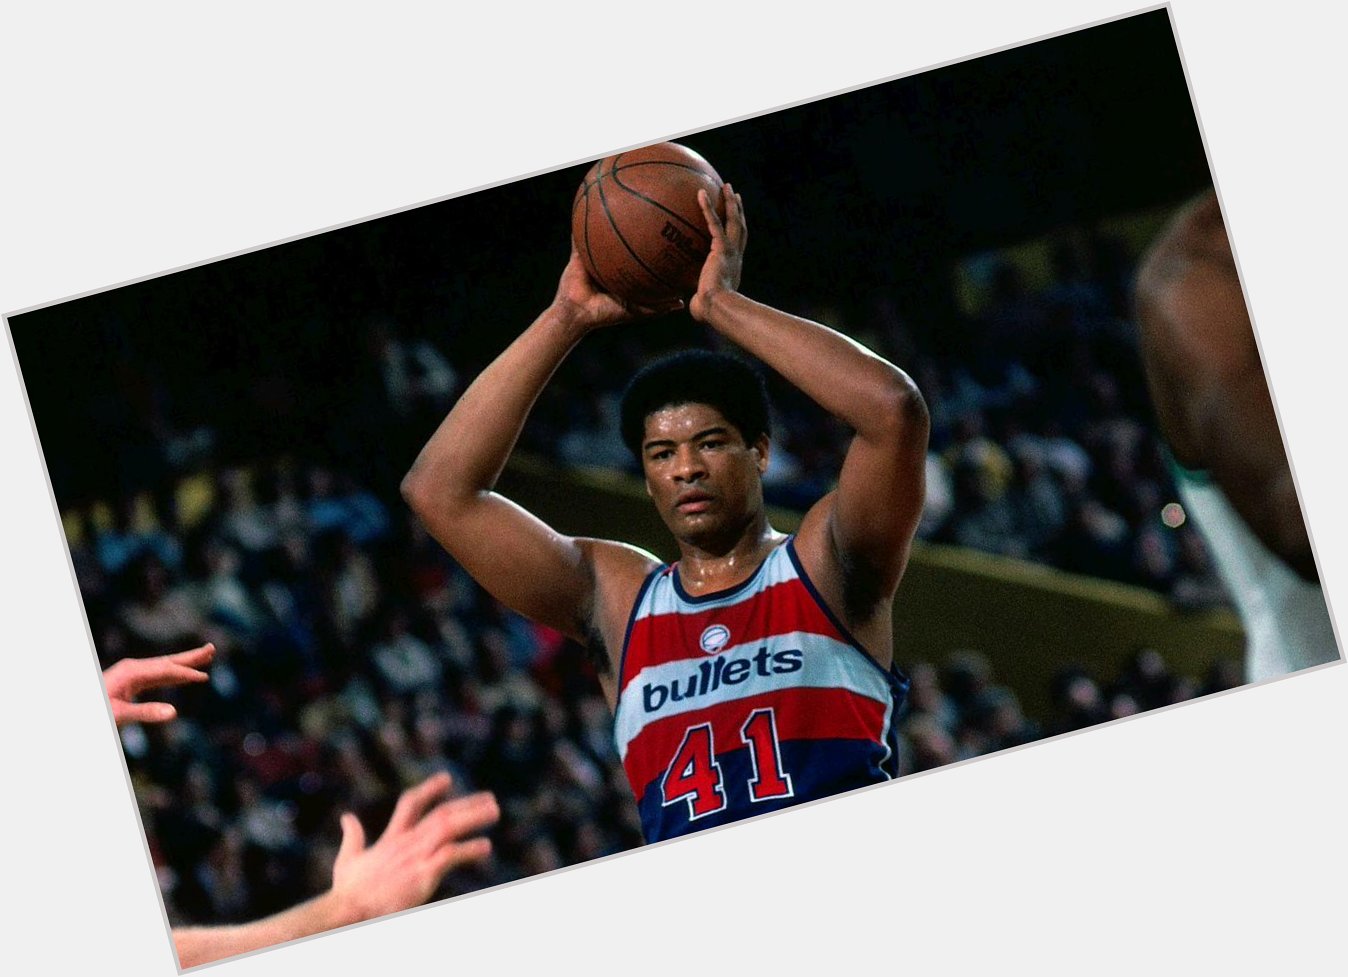 Happy 70th Birthday to legend, former MVP & ROY Wes Unseld!

MORE:  